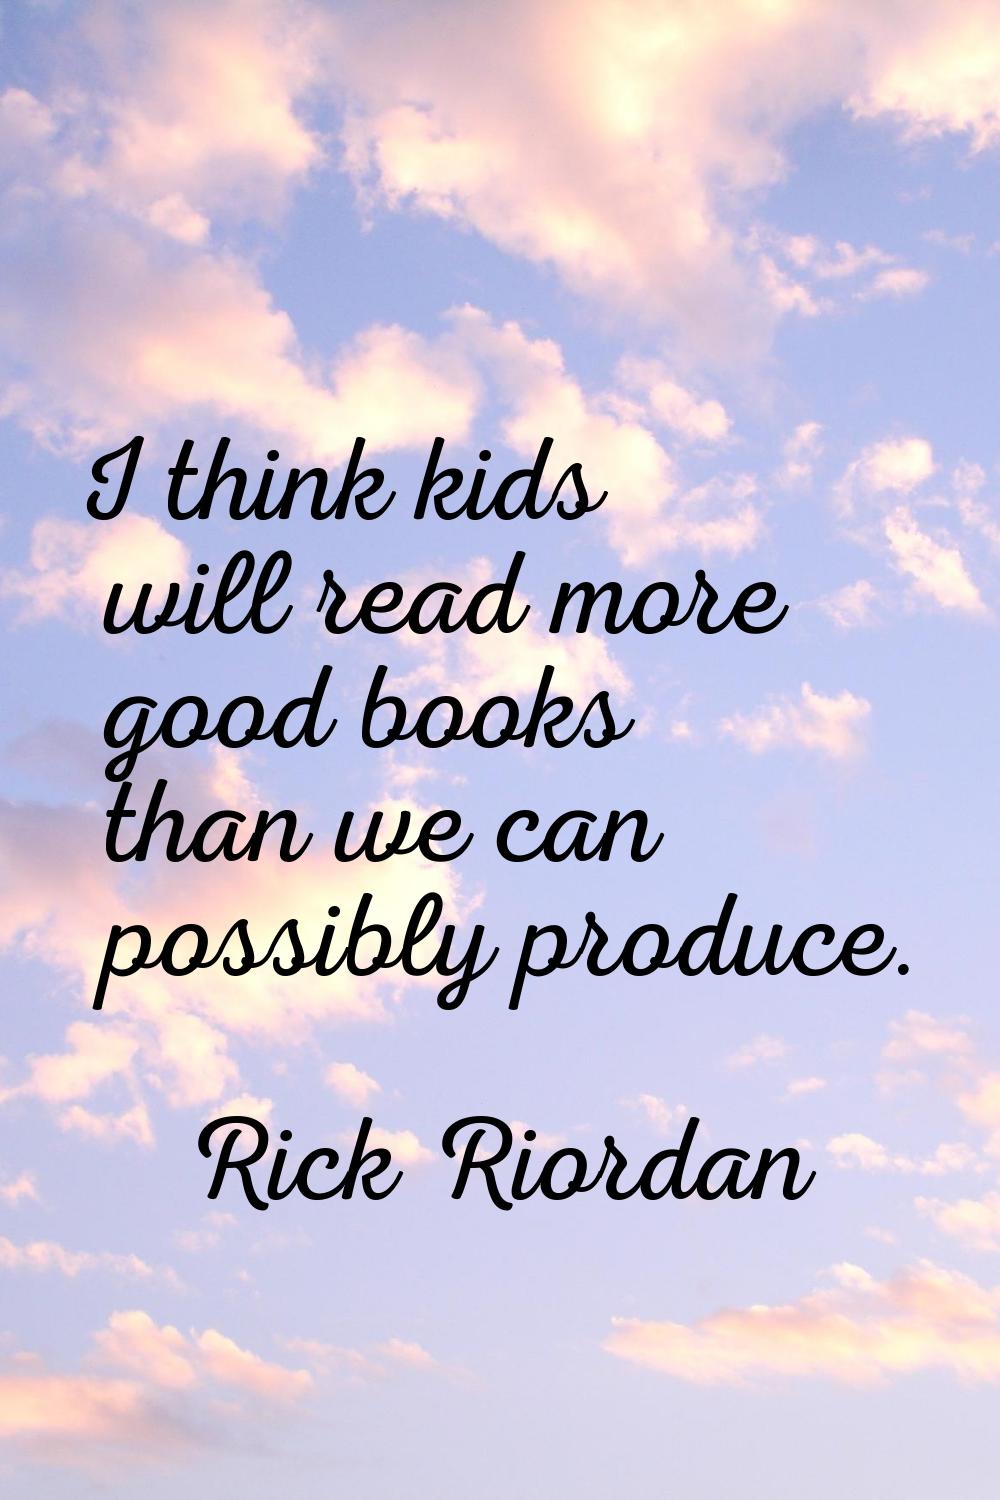 I think kids will read more good books than we can possibly produce.